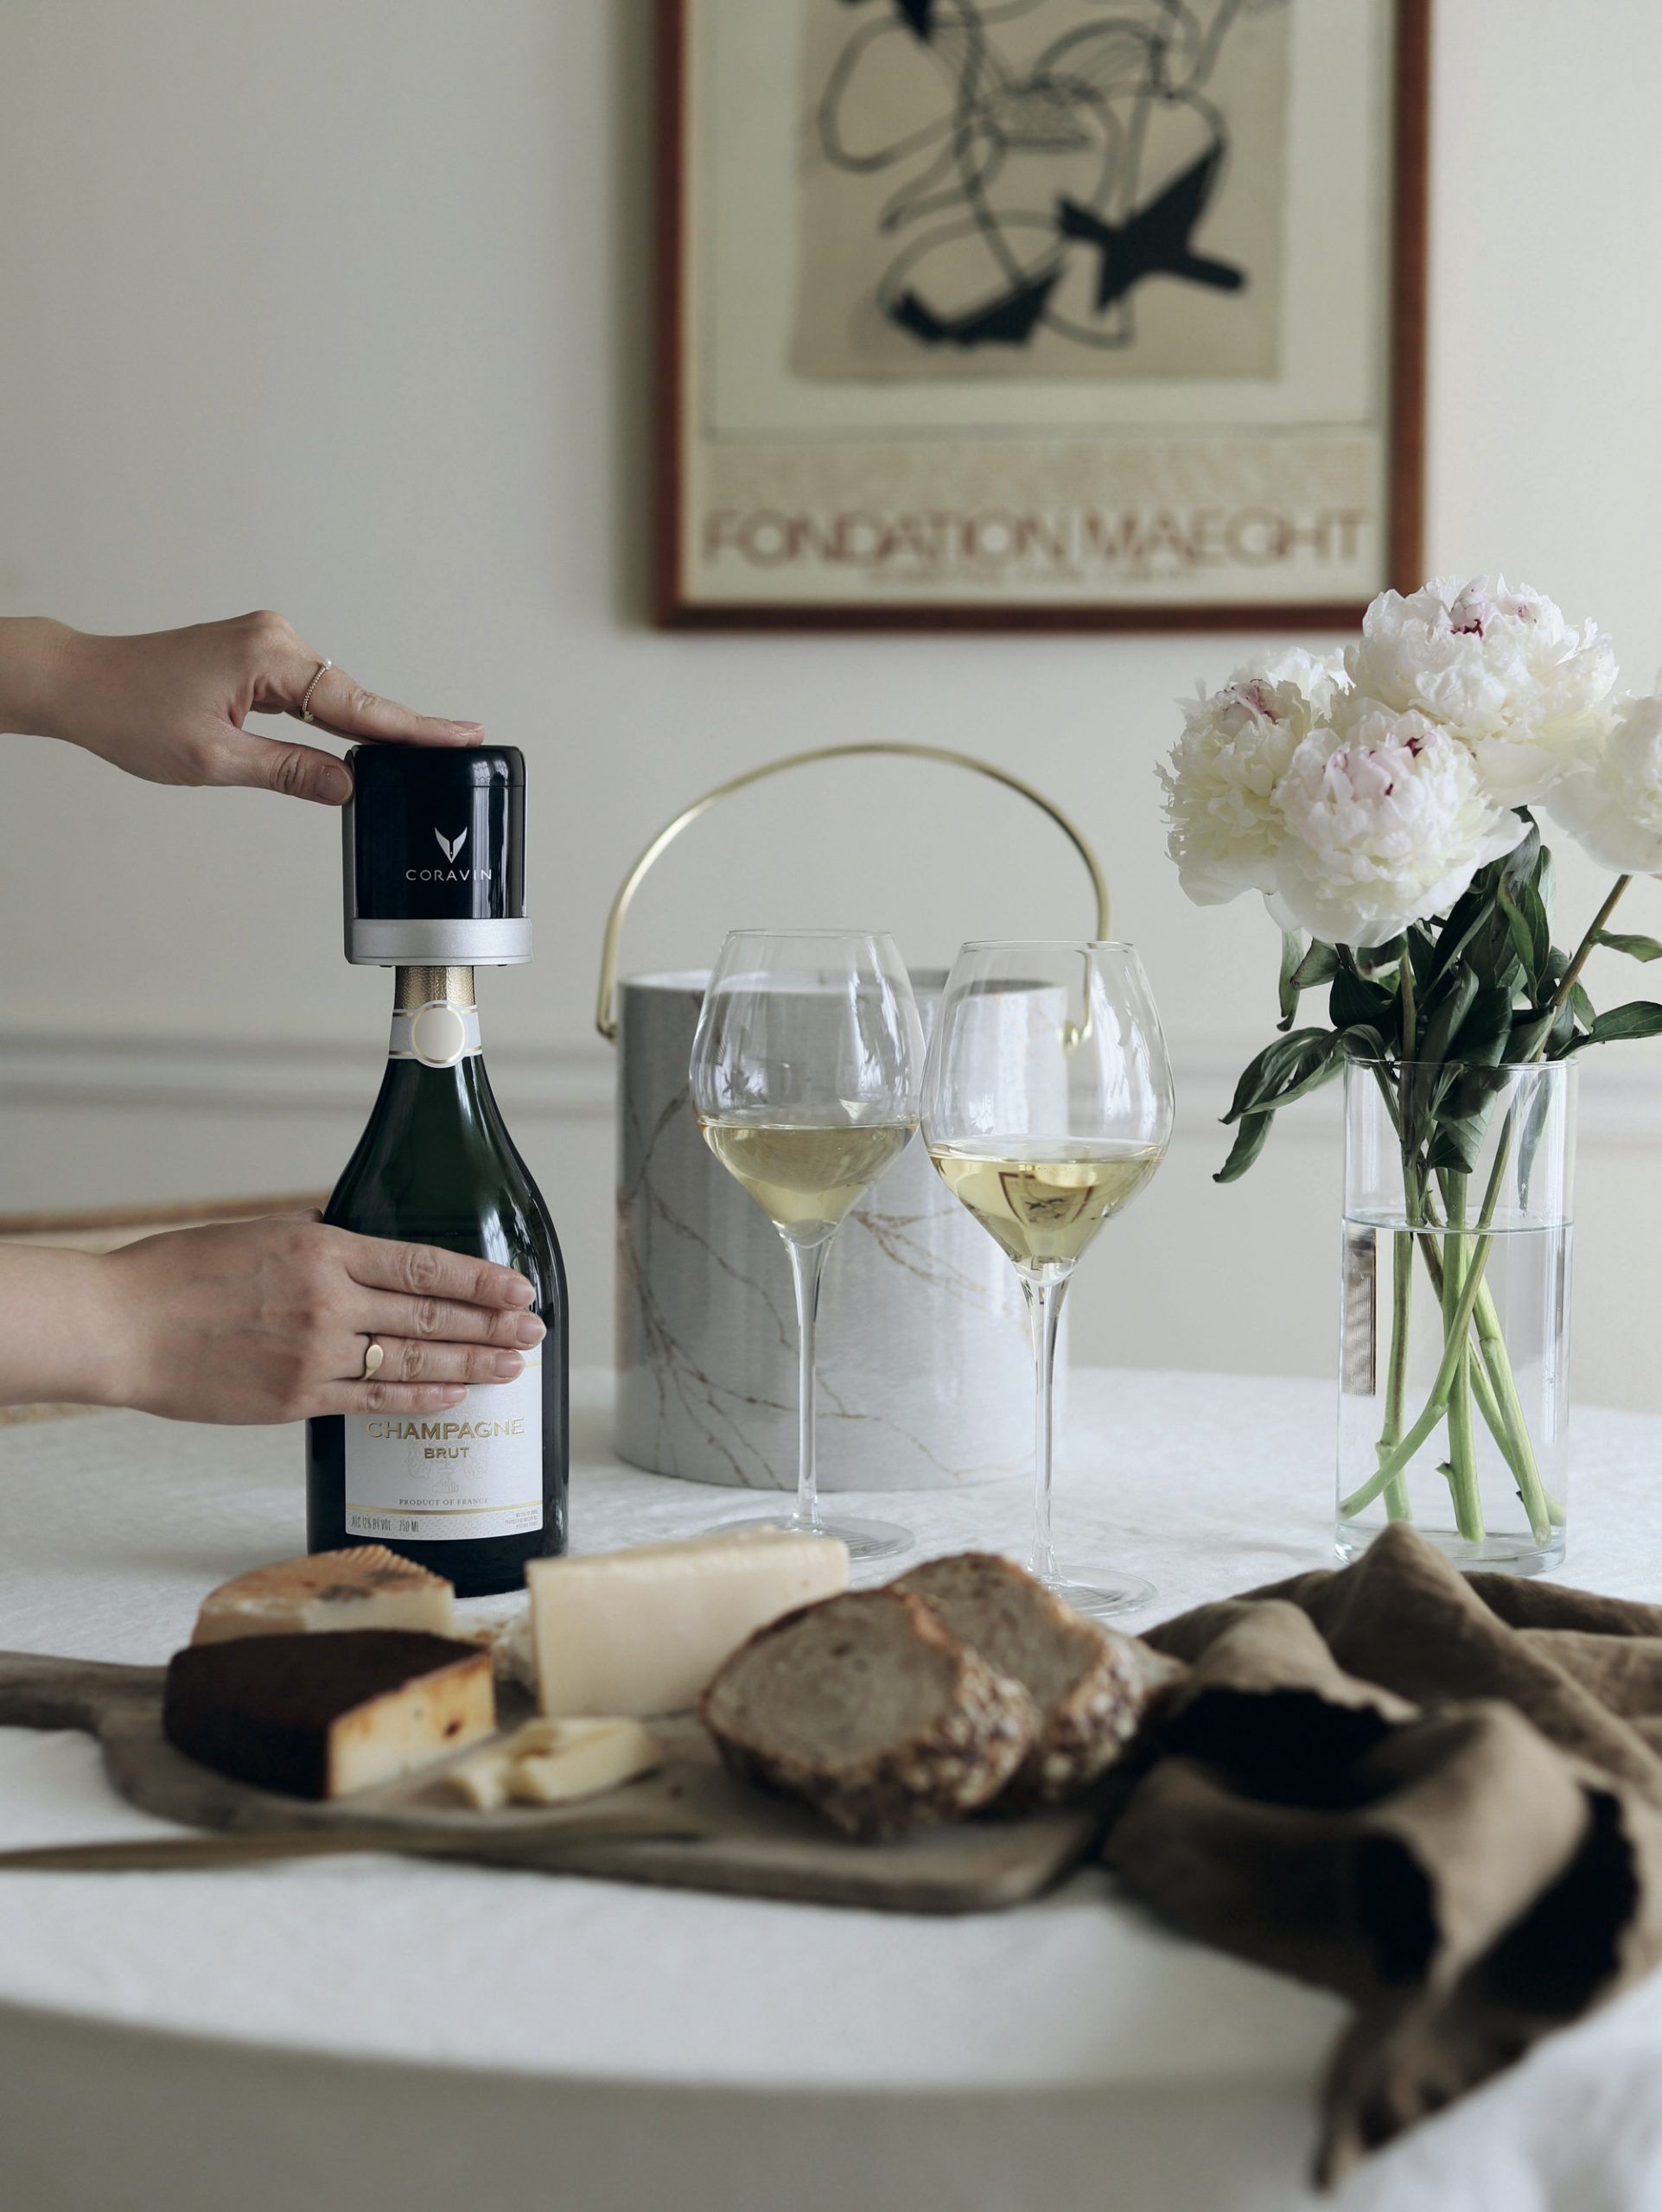 coravin's-new-sparkling-system-is-a-dream-true-for-champagne-collectors-and-bubbly-lovers